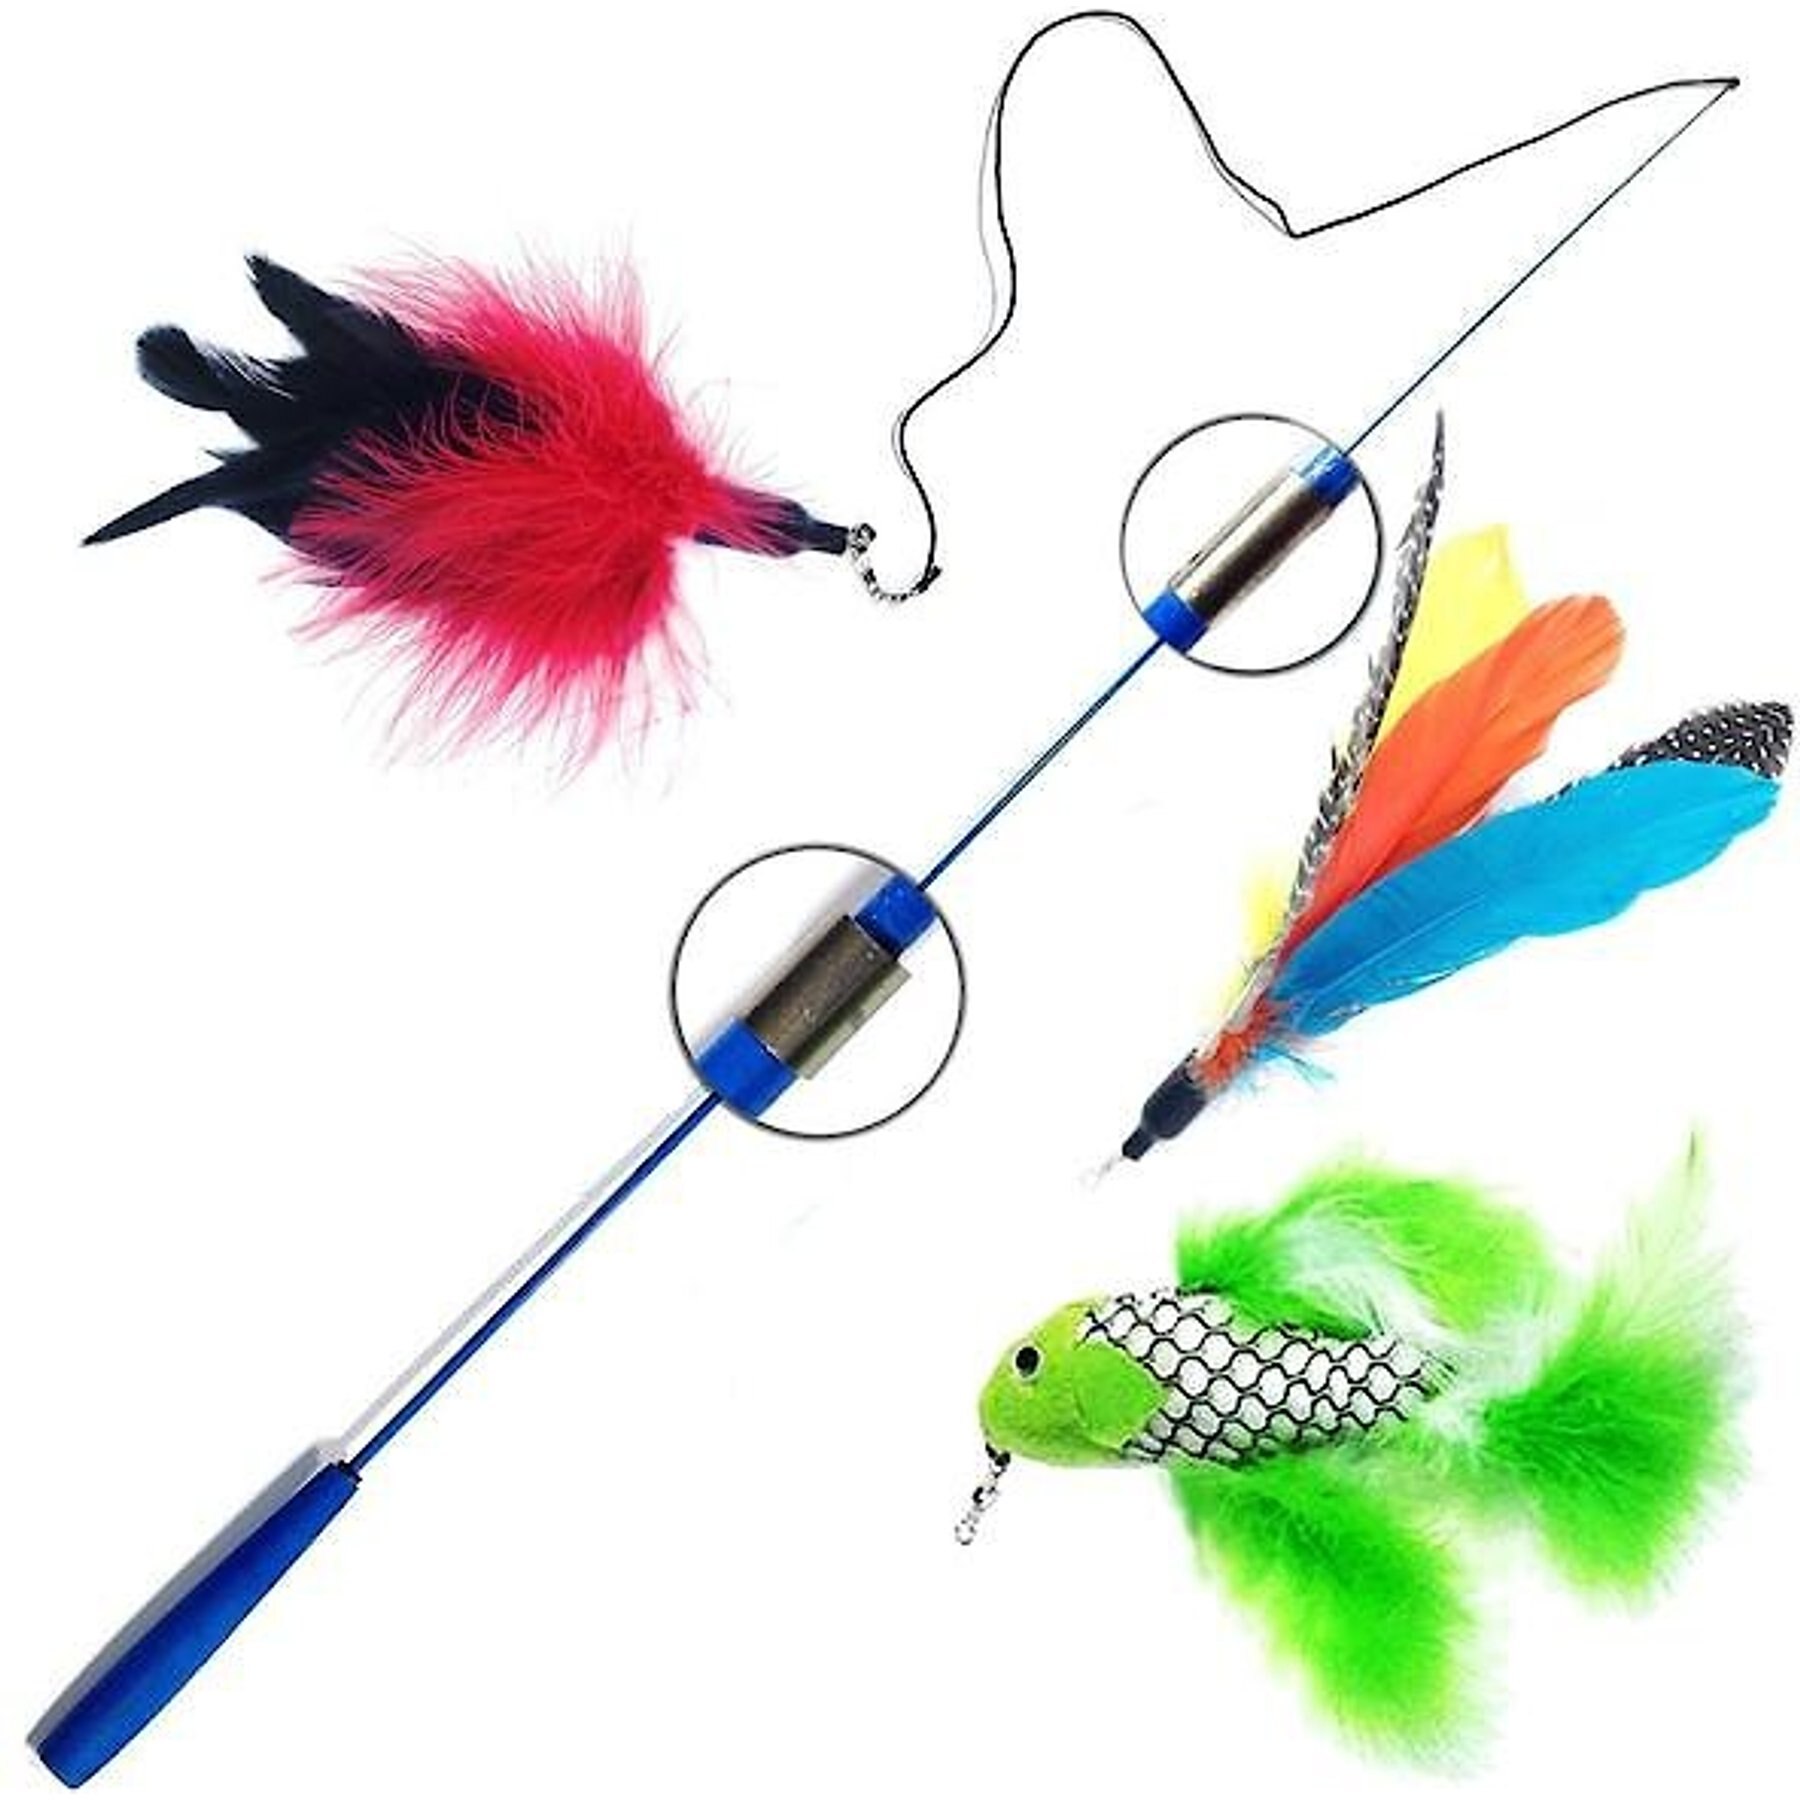 7 pcs Small Flying Cat Wand Feathers Replace Playing Insects And